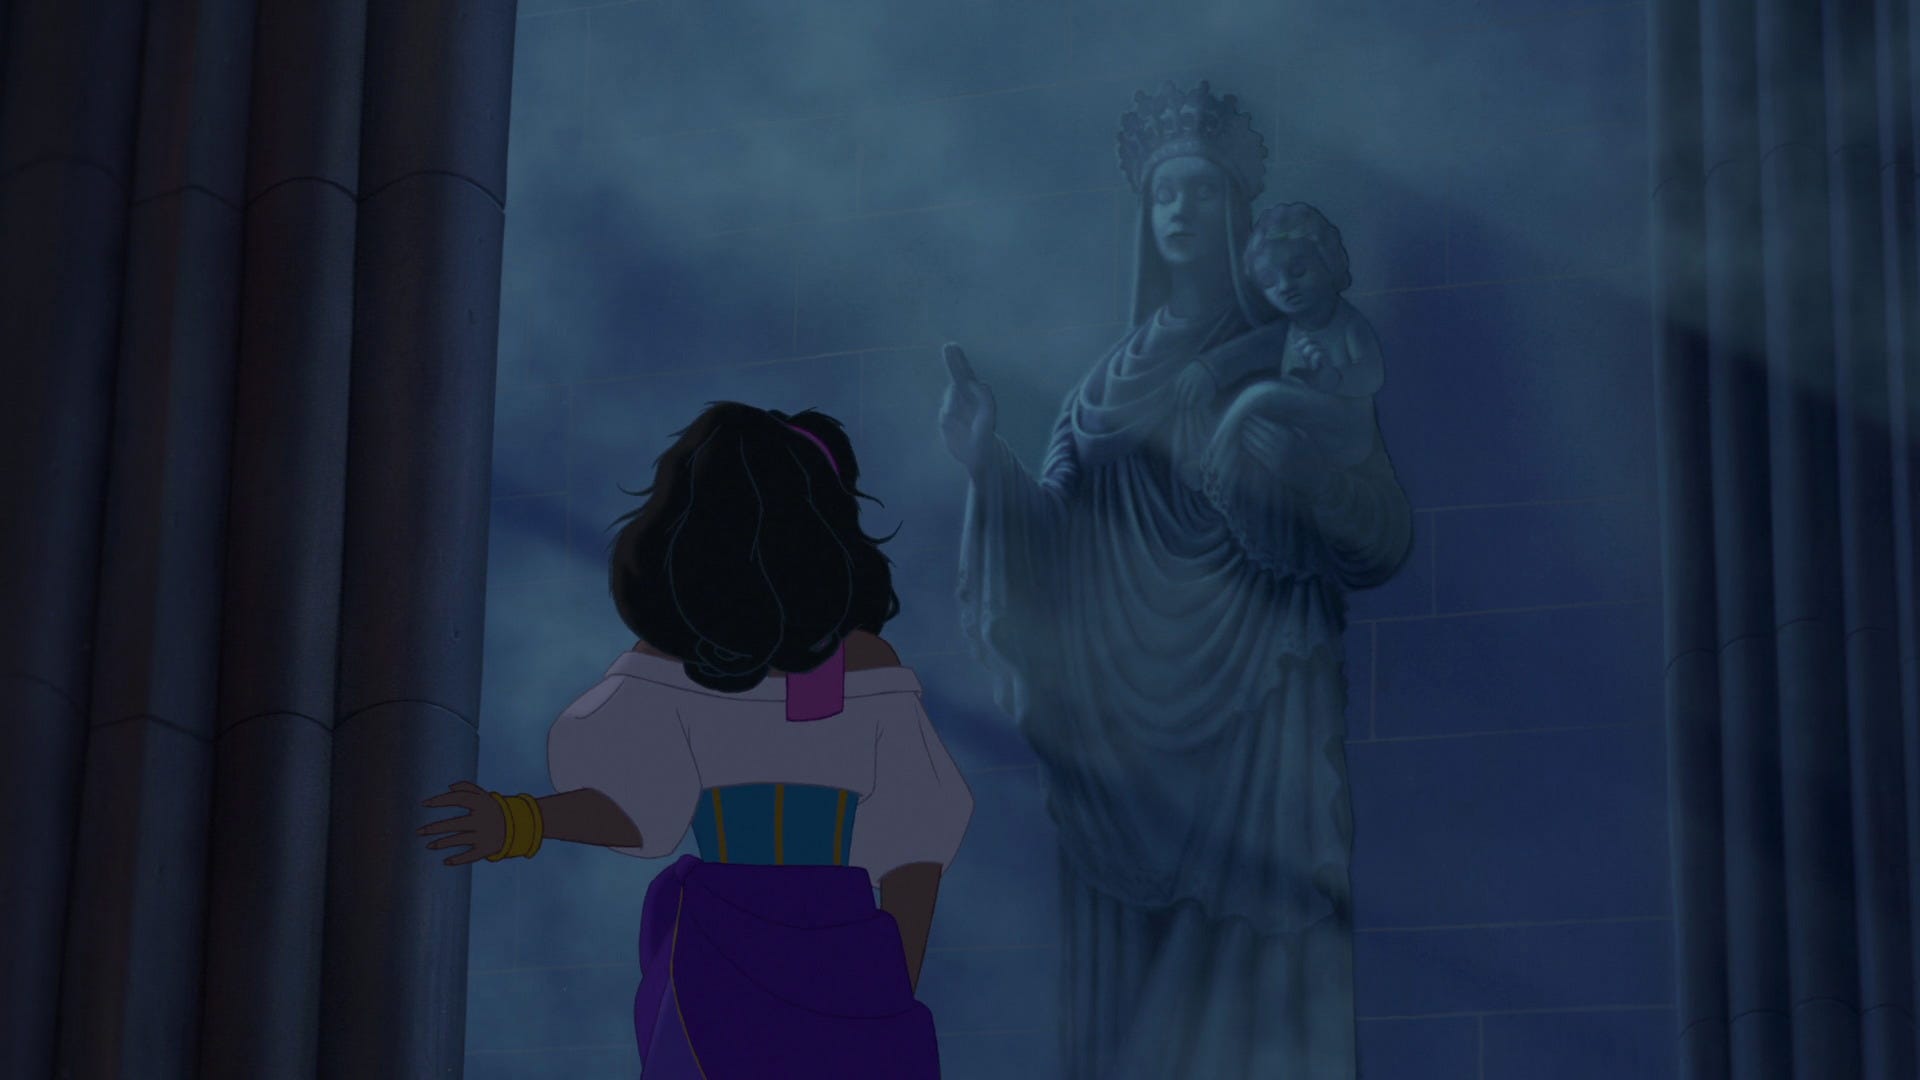 Why ‘The Hunchback of Notre Dame’ is one of Disney’s greatest films